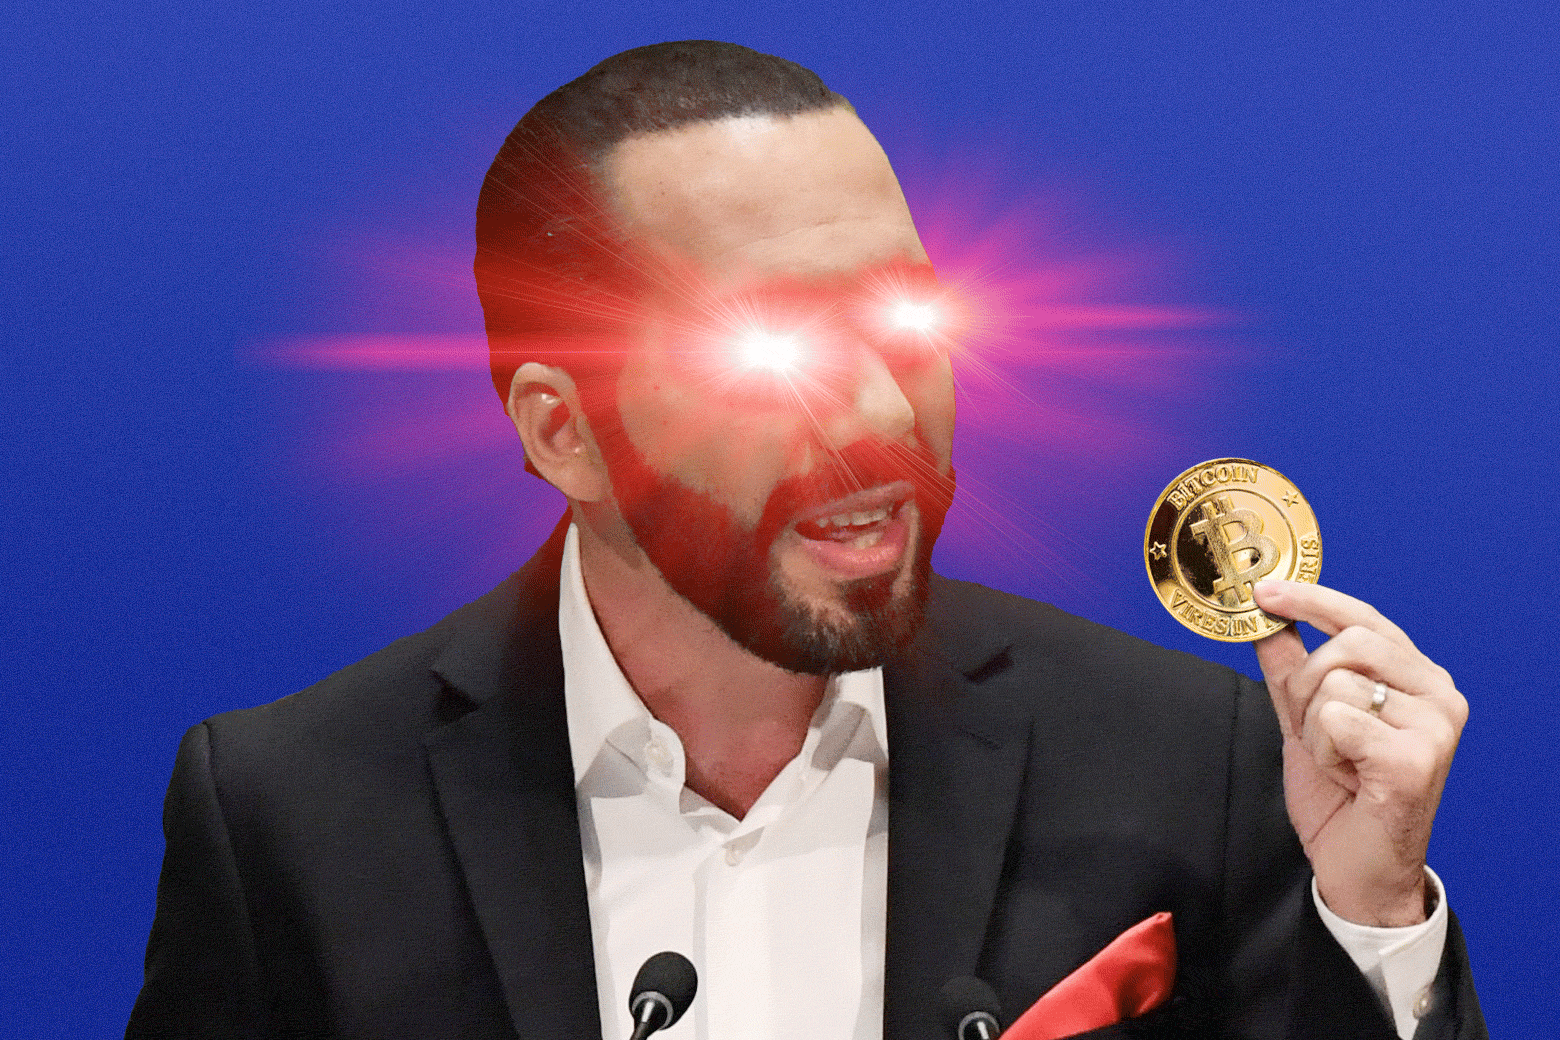 El Salvador's Bitcoin bet: Why Nayib Bukele went all-in on crypto. – Slate